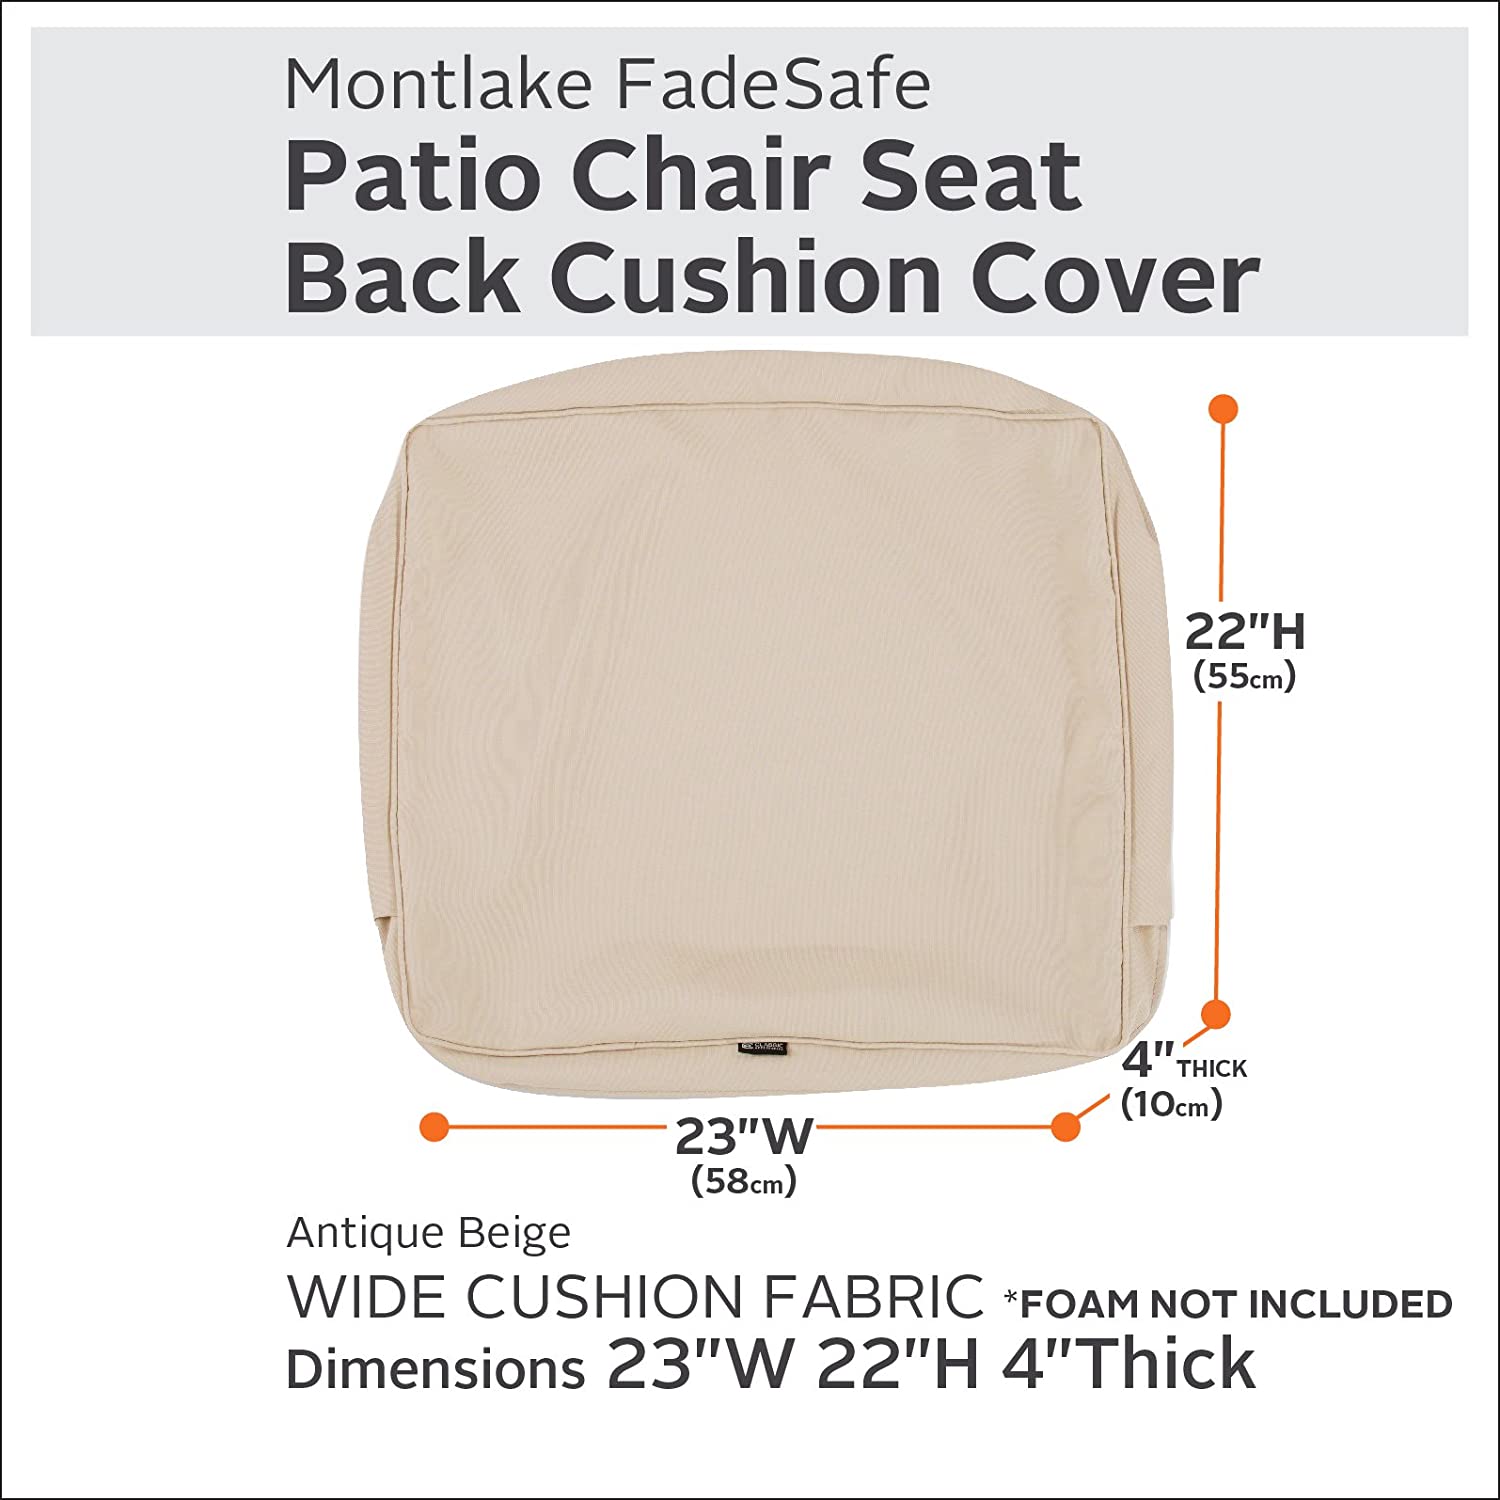 Classic Accessories Montlake Water-Resistant 23 x 22 x 4 Inch Outdoor Back Cushion Slip Cover, Patio Furniture Cushion Cover, Antique Beige, Patio Furniture Cushion Covers